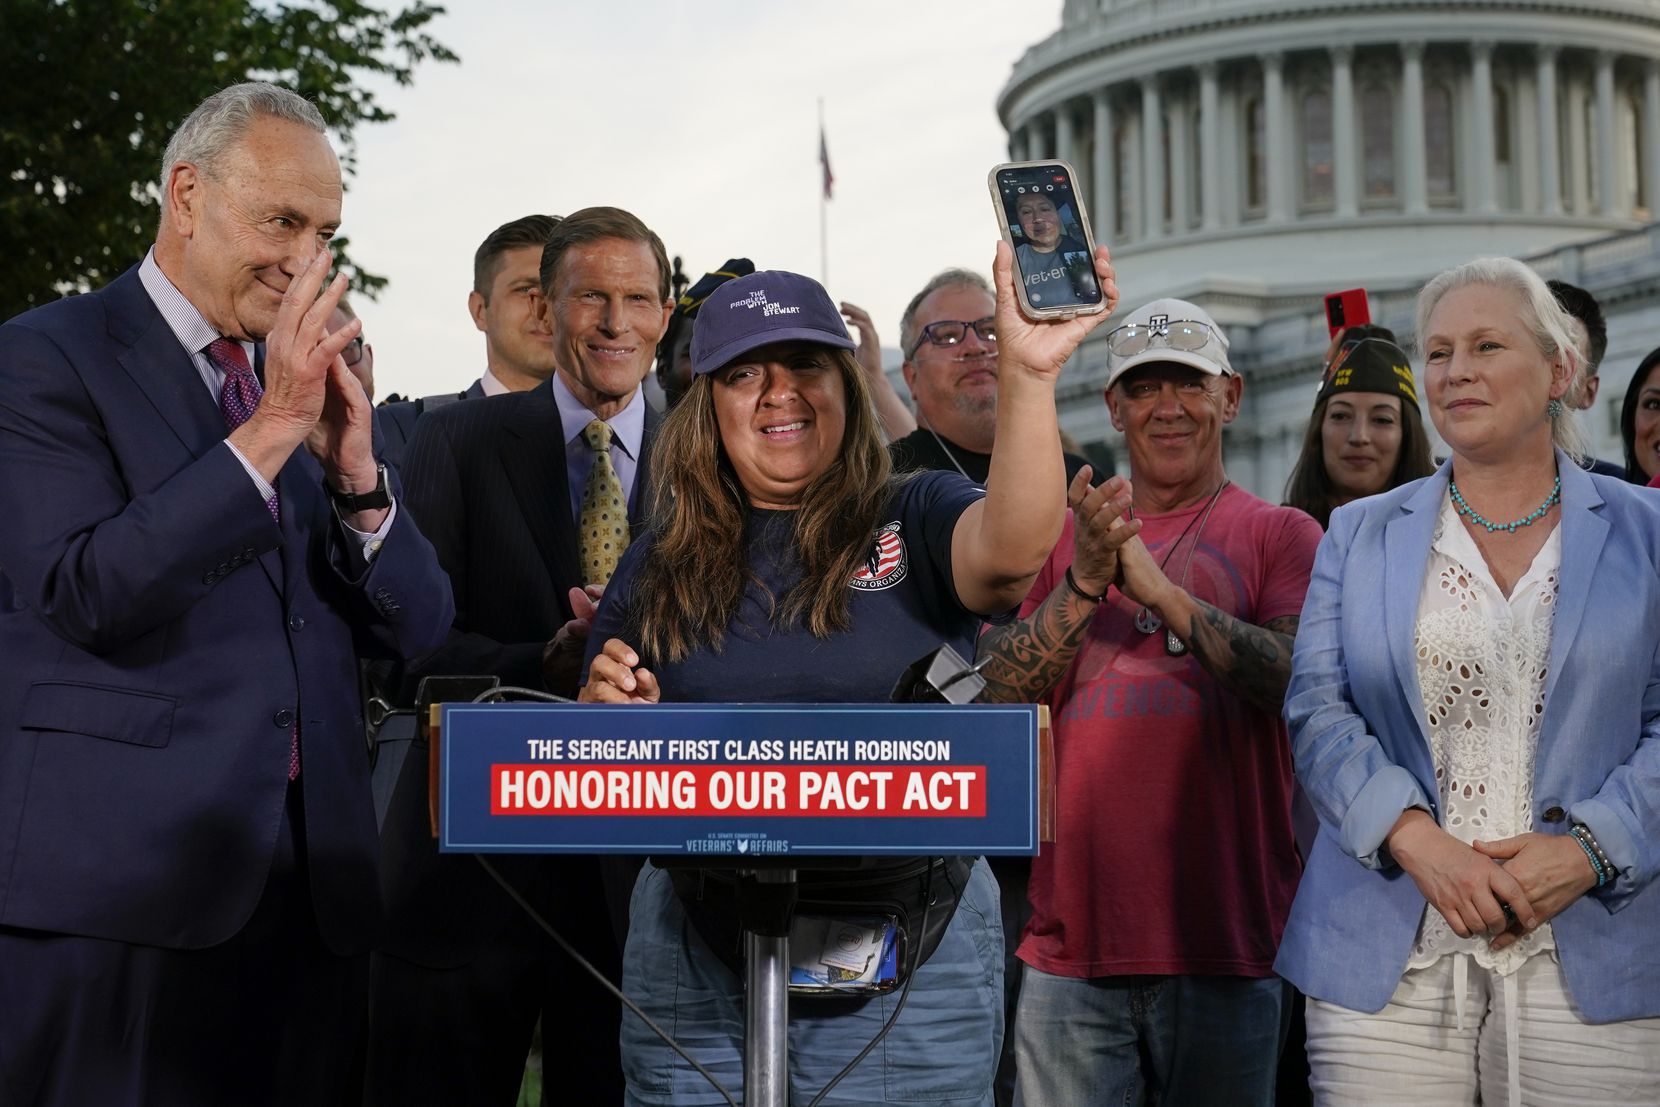 Senate Swamp --  On August 2, 2022, Rosie Torres has Le Roy Torres on Facetime during a press conference with Sen. Schumer and Sen. Gillibrand following the final passage of the PACT Act.